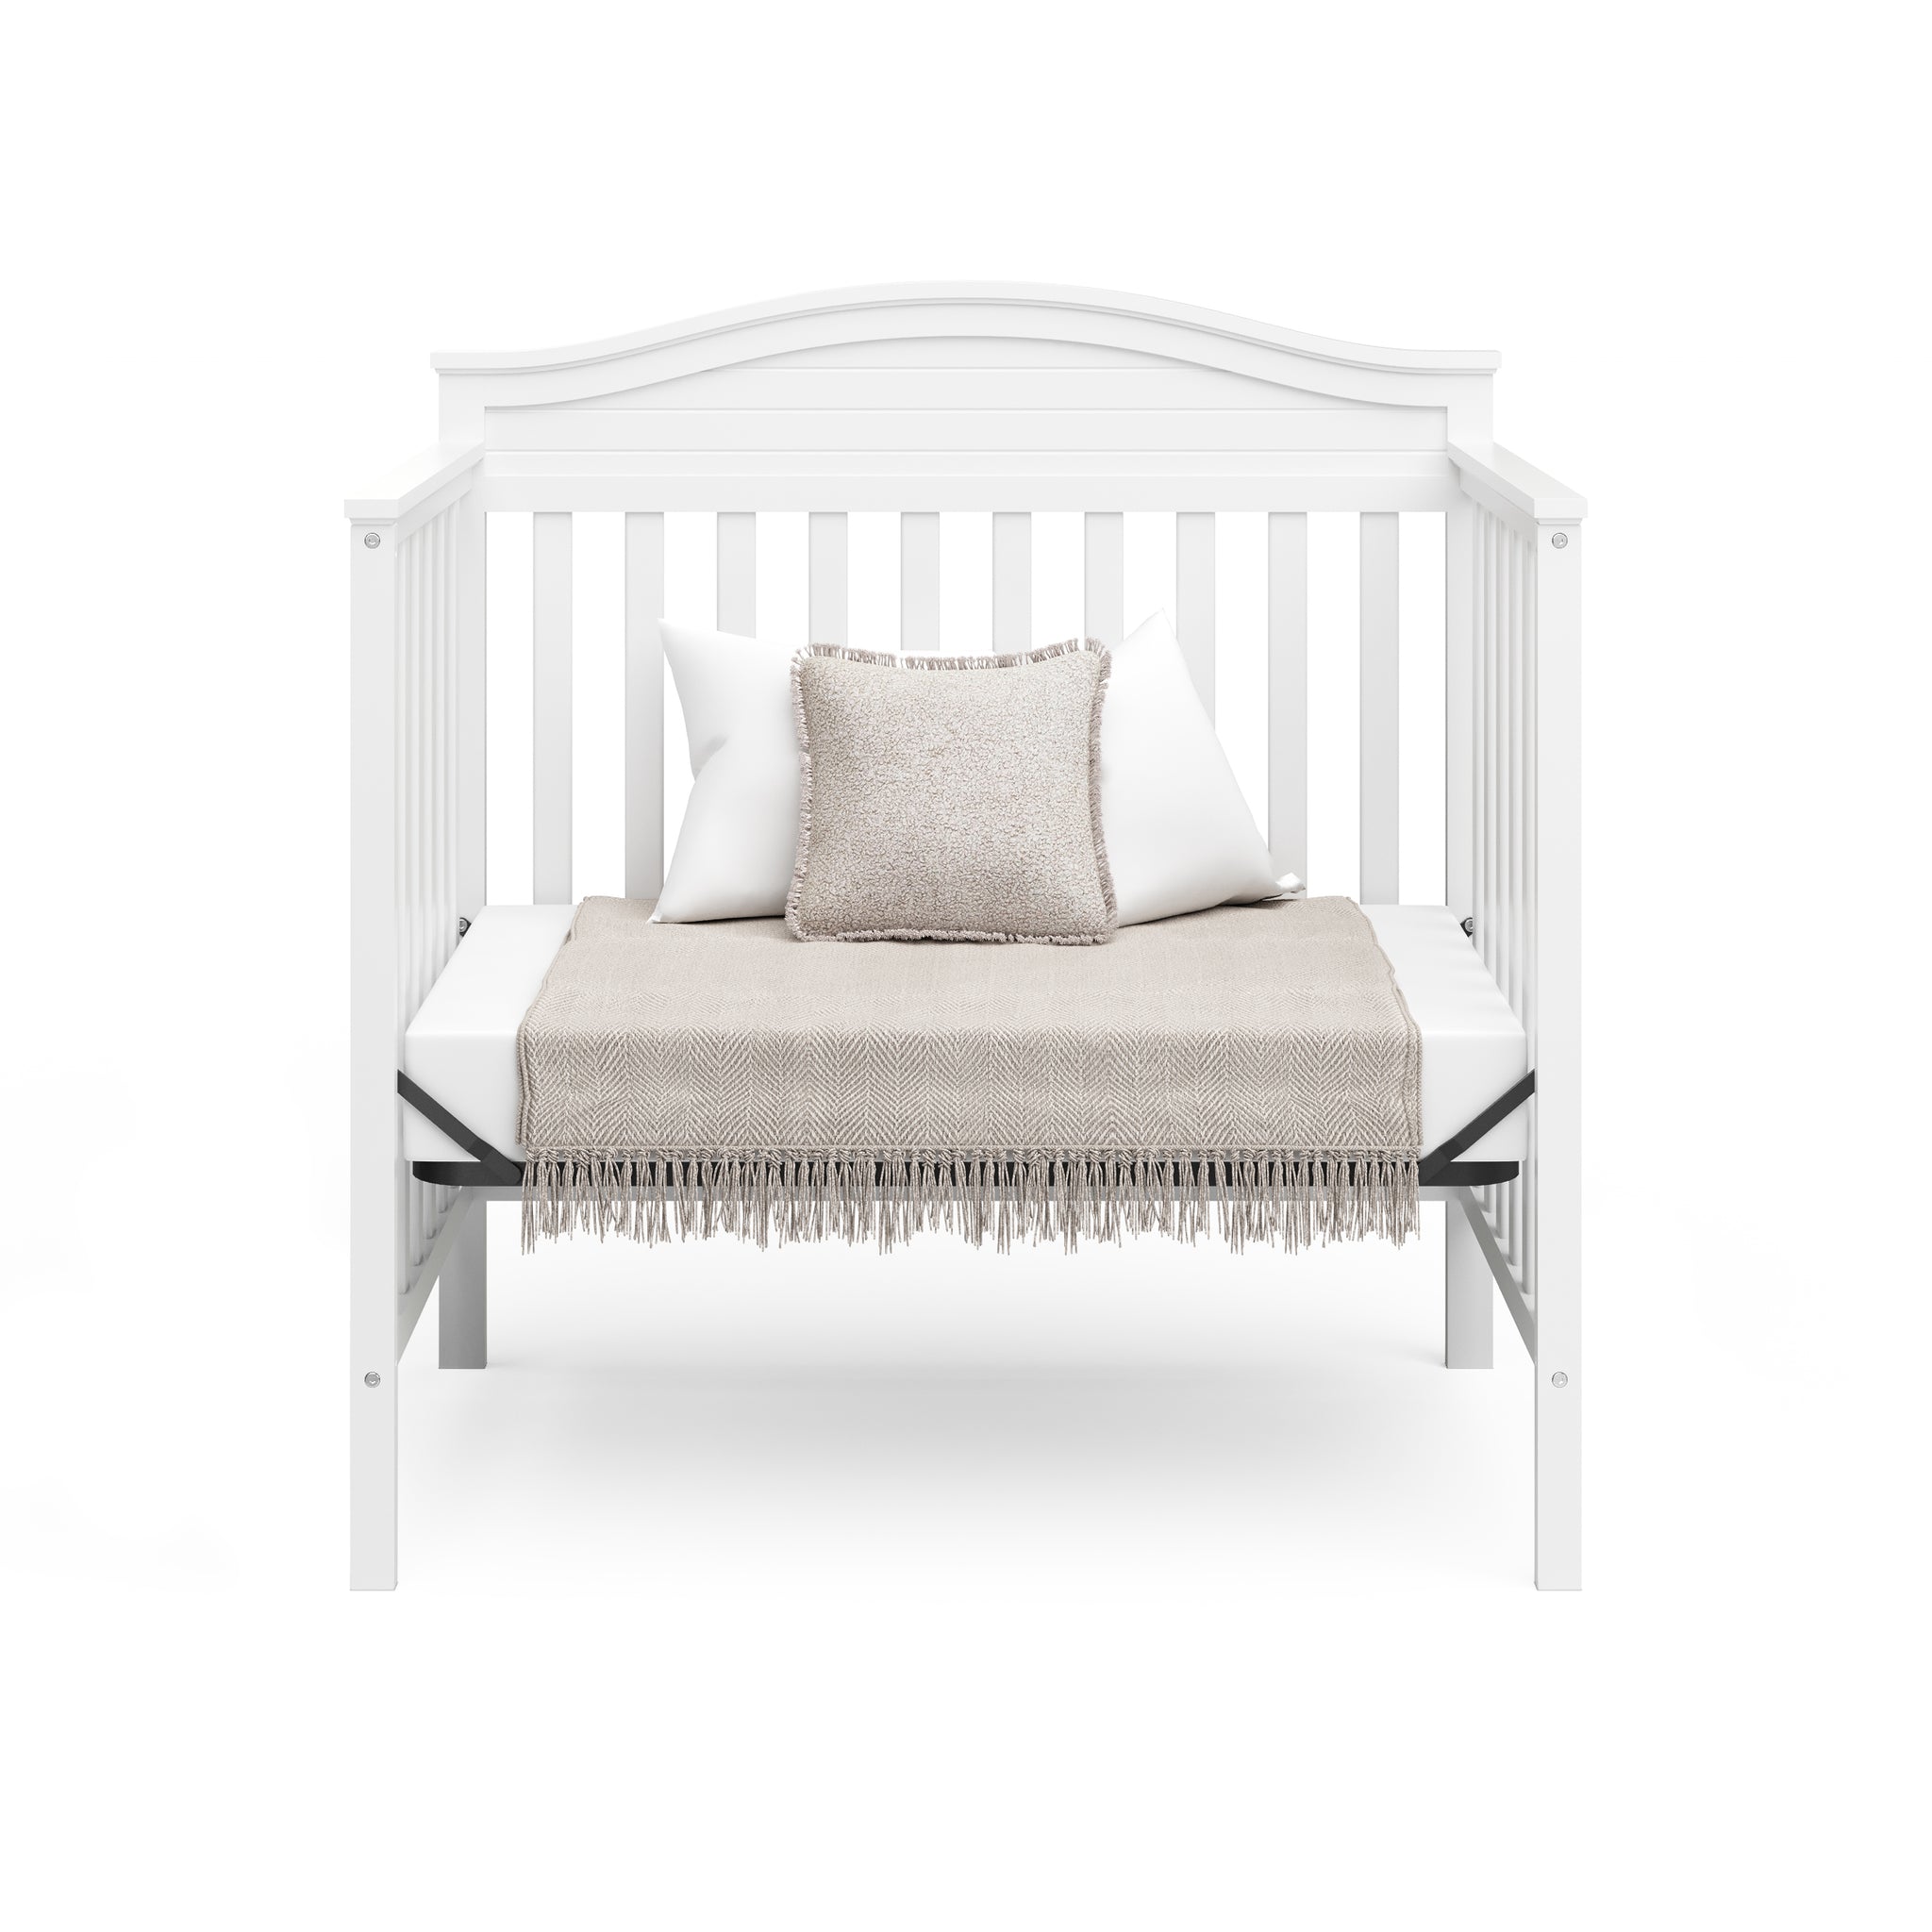 White crib in daybed conversion